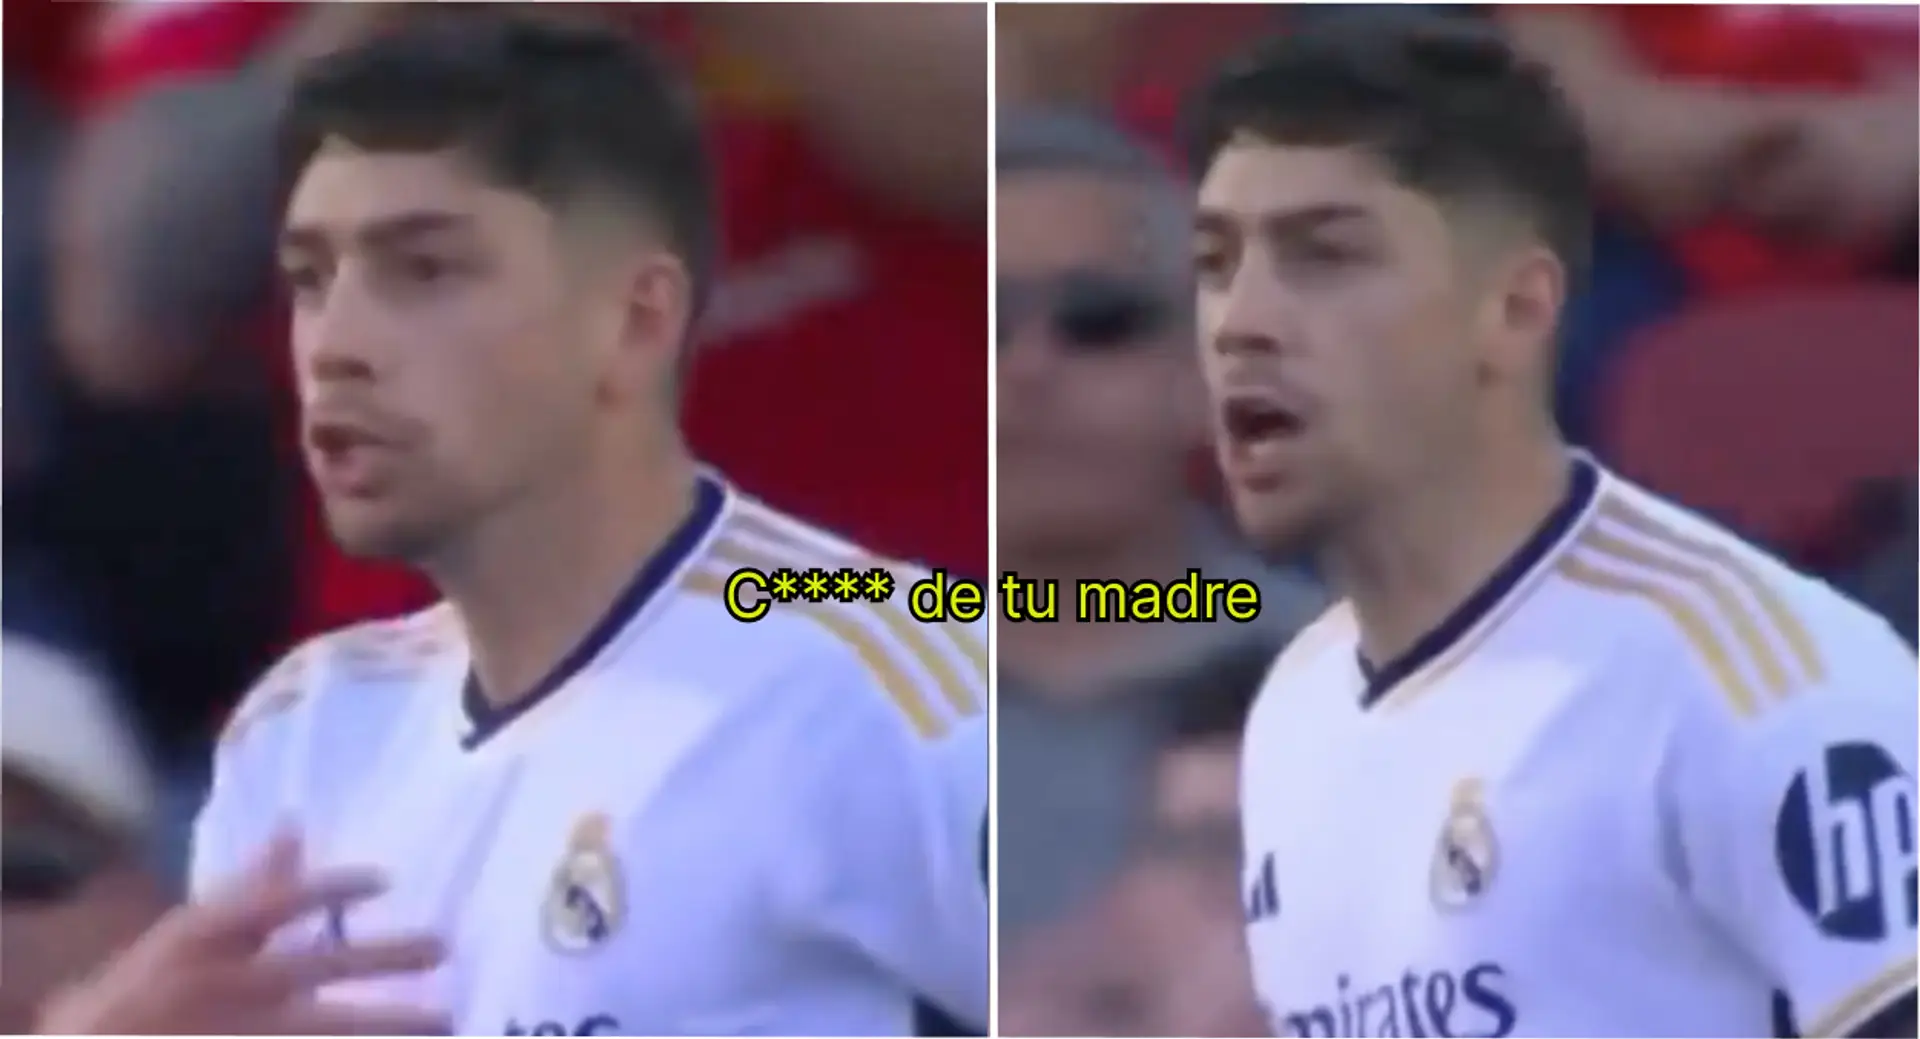 'Son of a b*tch': Why Fede Valverde yelled at Brahim Diaz mid Mallorca game 